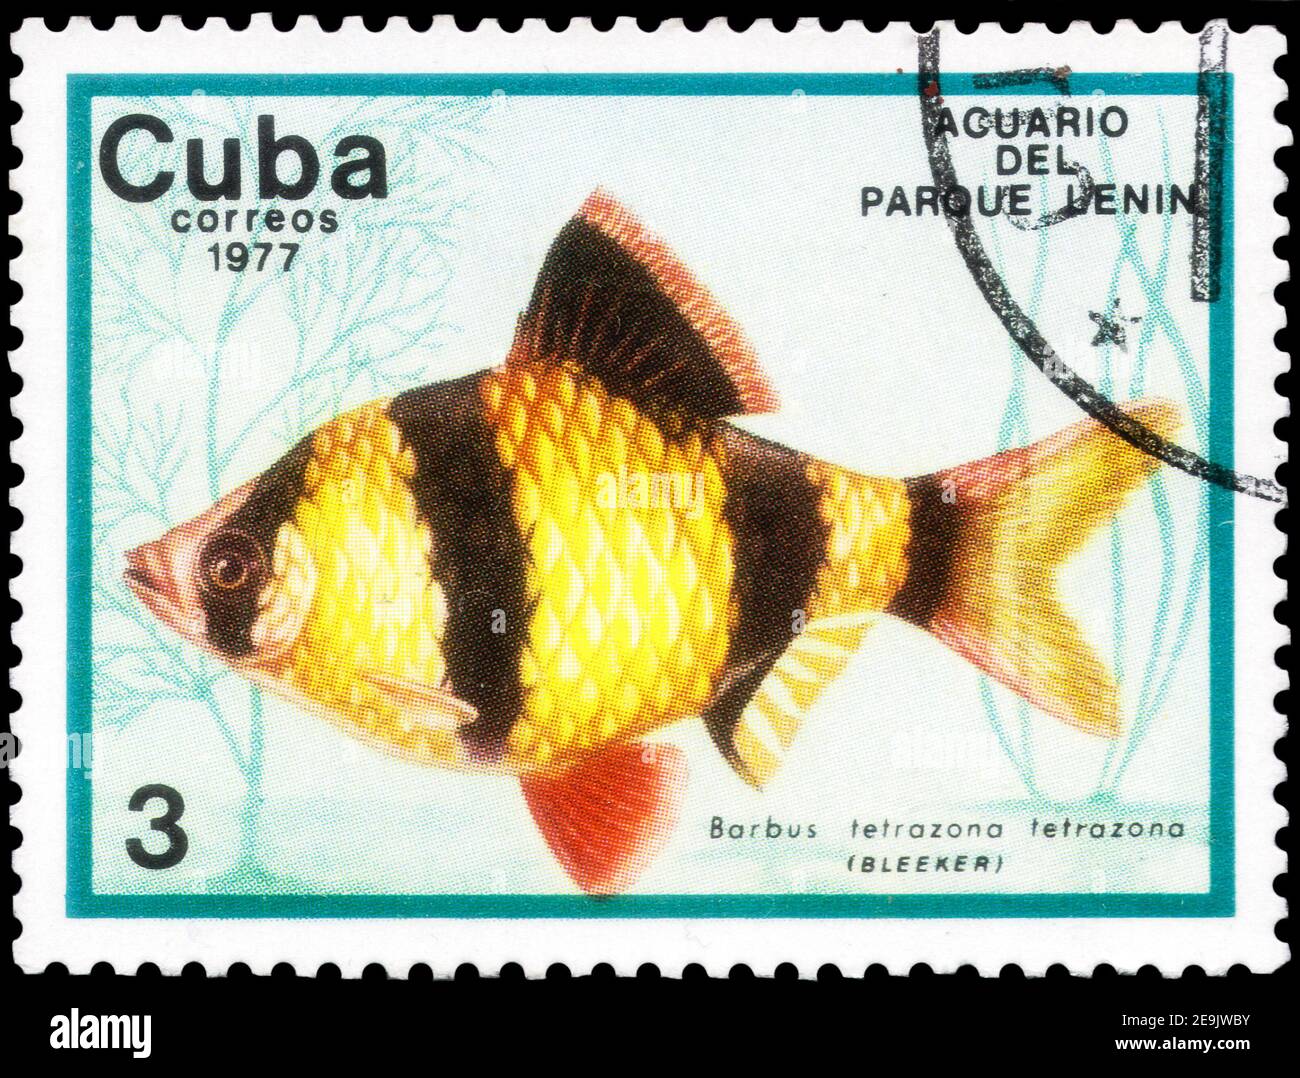 Saint Petersburg, Russia - December 05, 2020: Stamp printed in the Cuba with the image of the Tiger Barb, Barbus tetrazona, circa 1977 Stock Photo